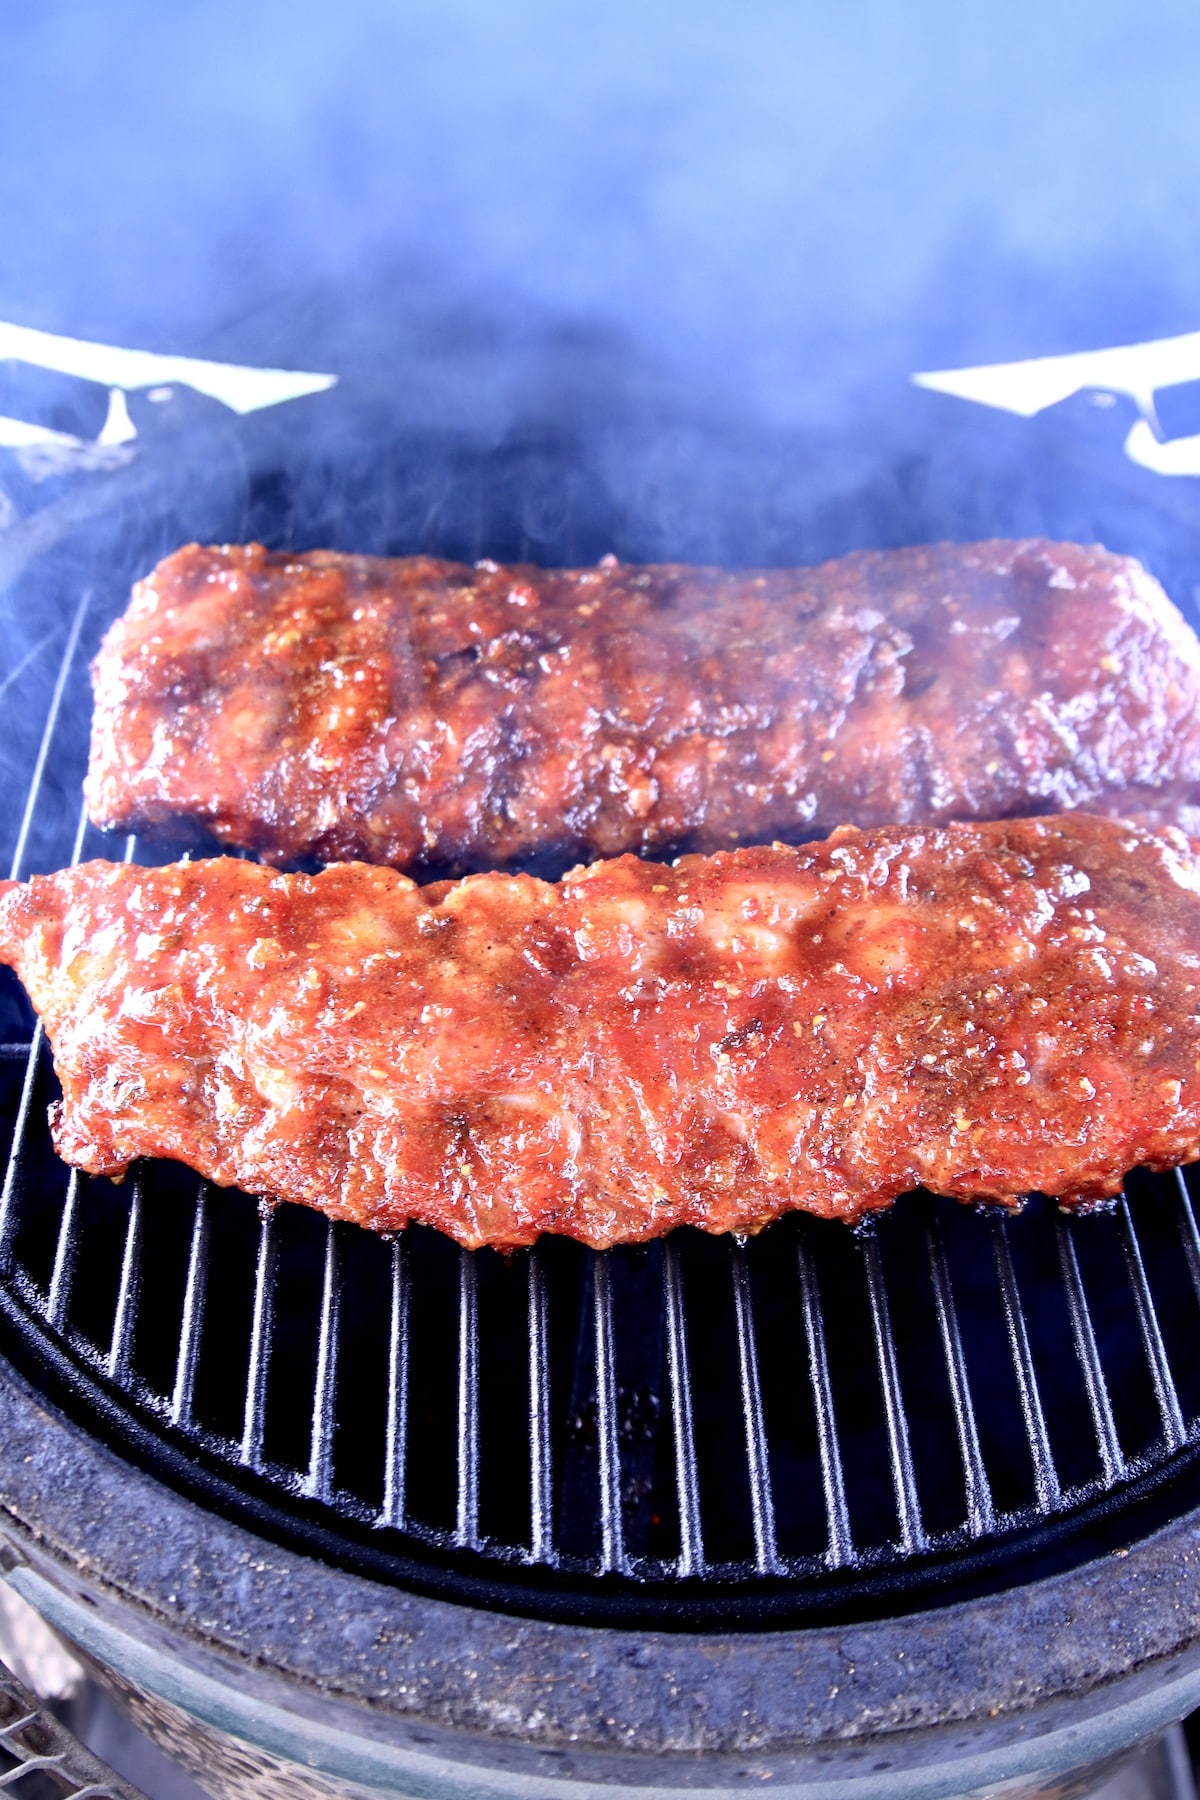 BBQ baby back ribs - 2 racks on a grill with smoke.